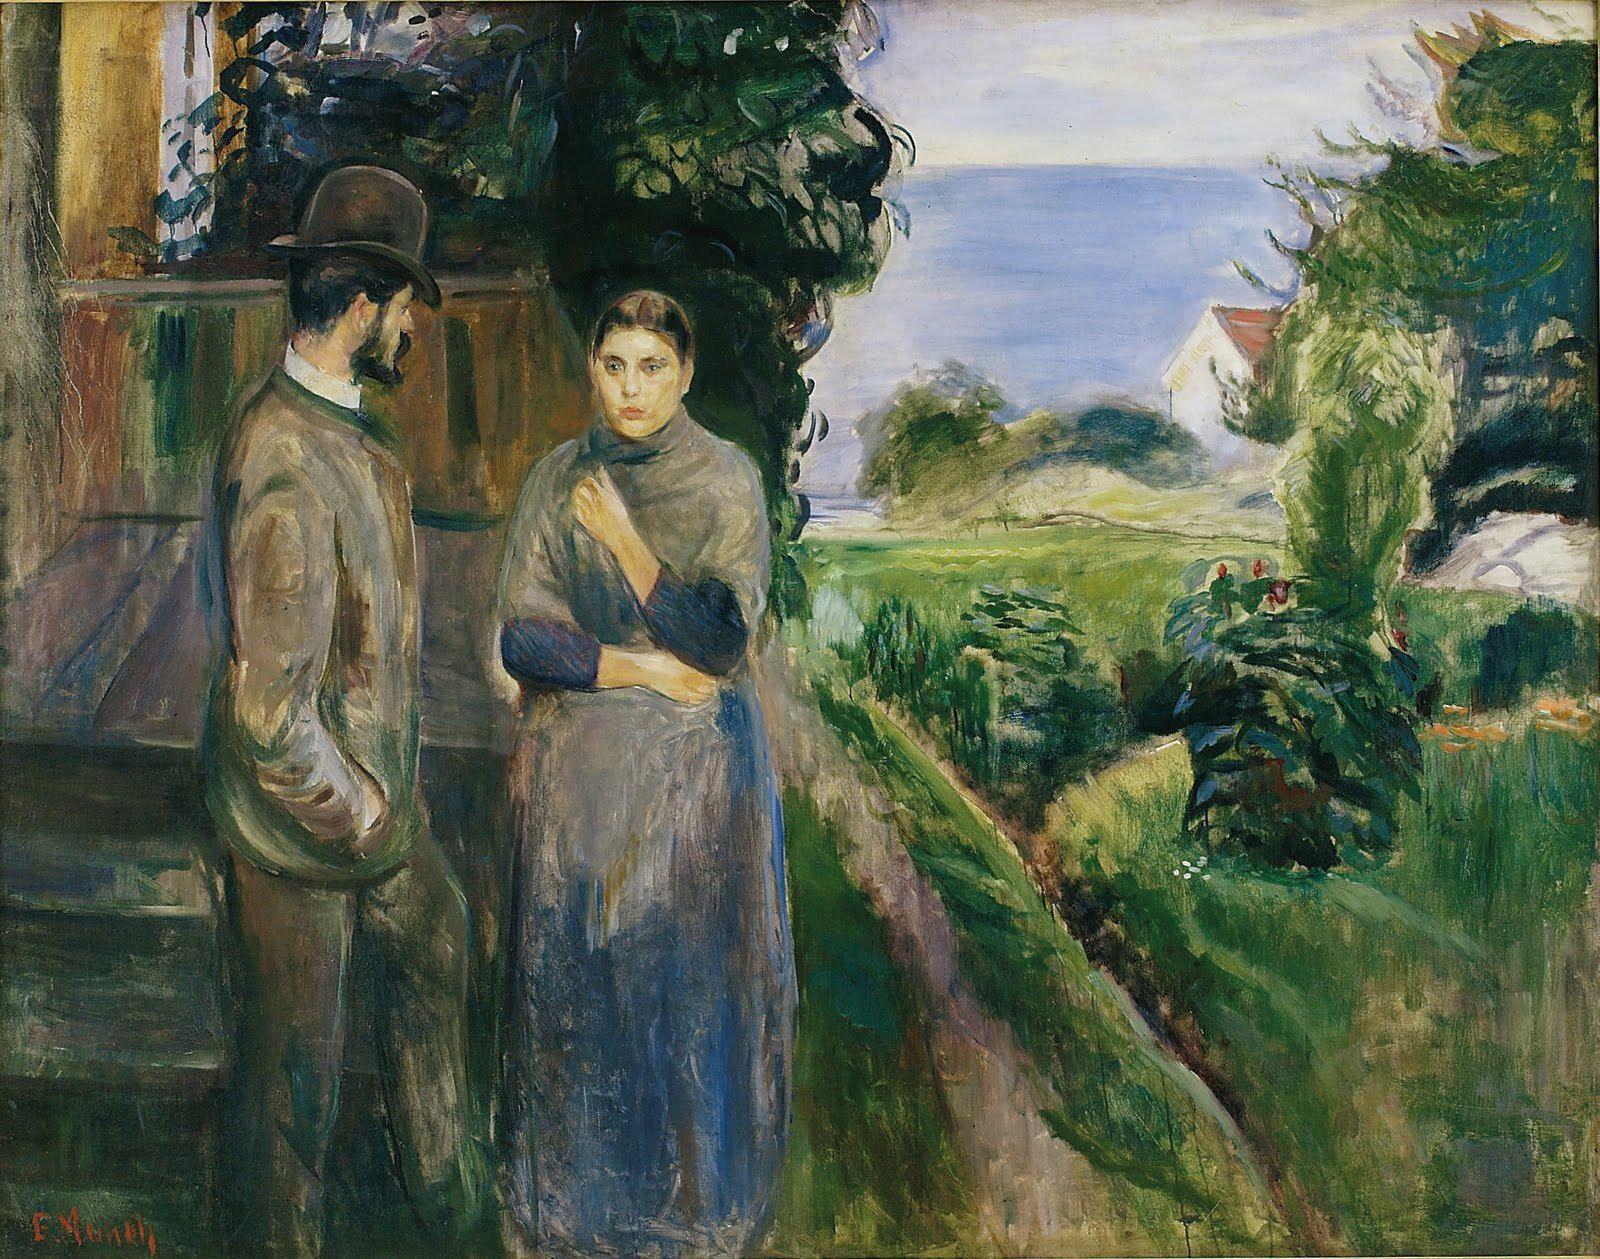 Painting Edvard Munch evening 1889 wallpaper and image